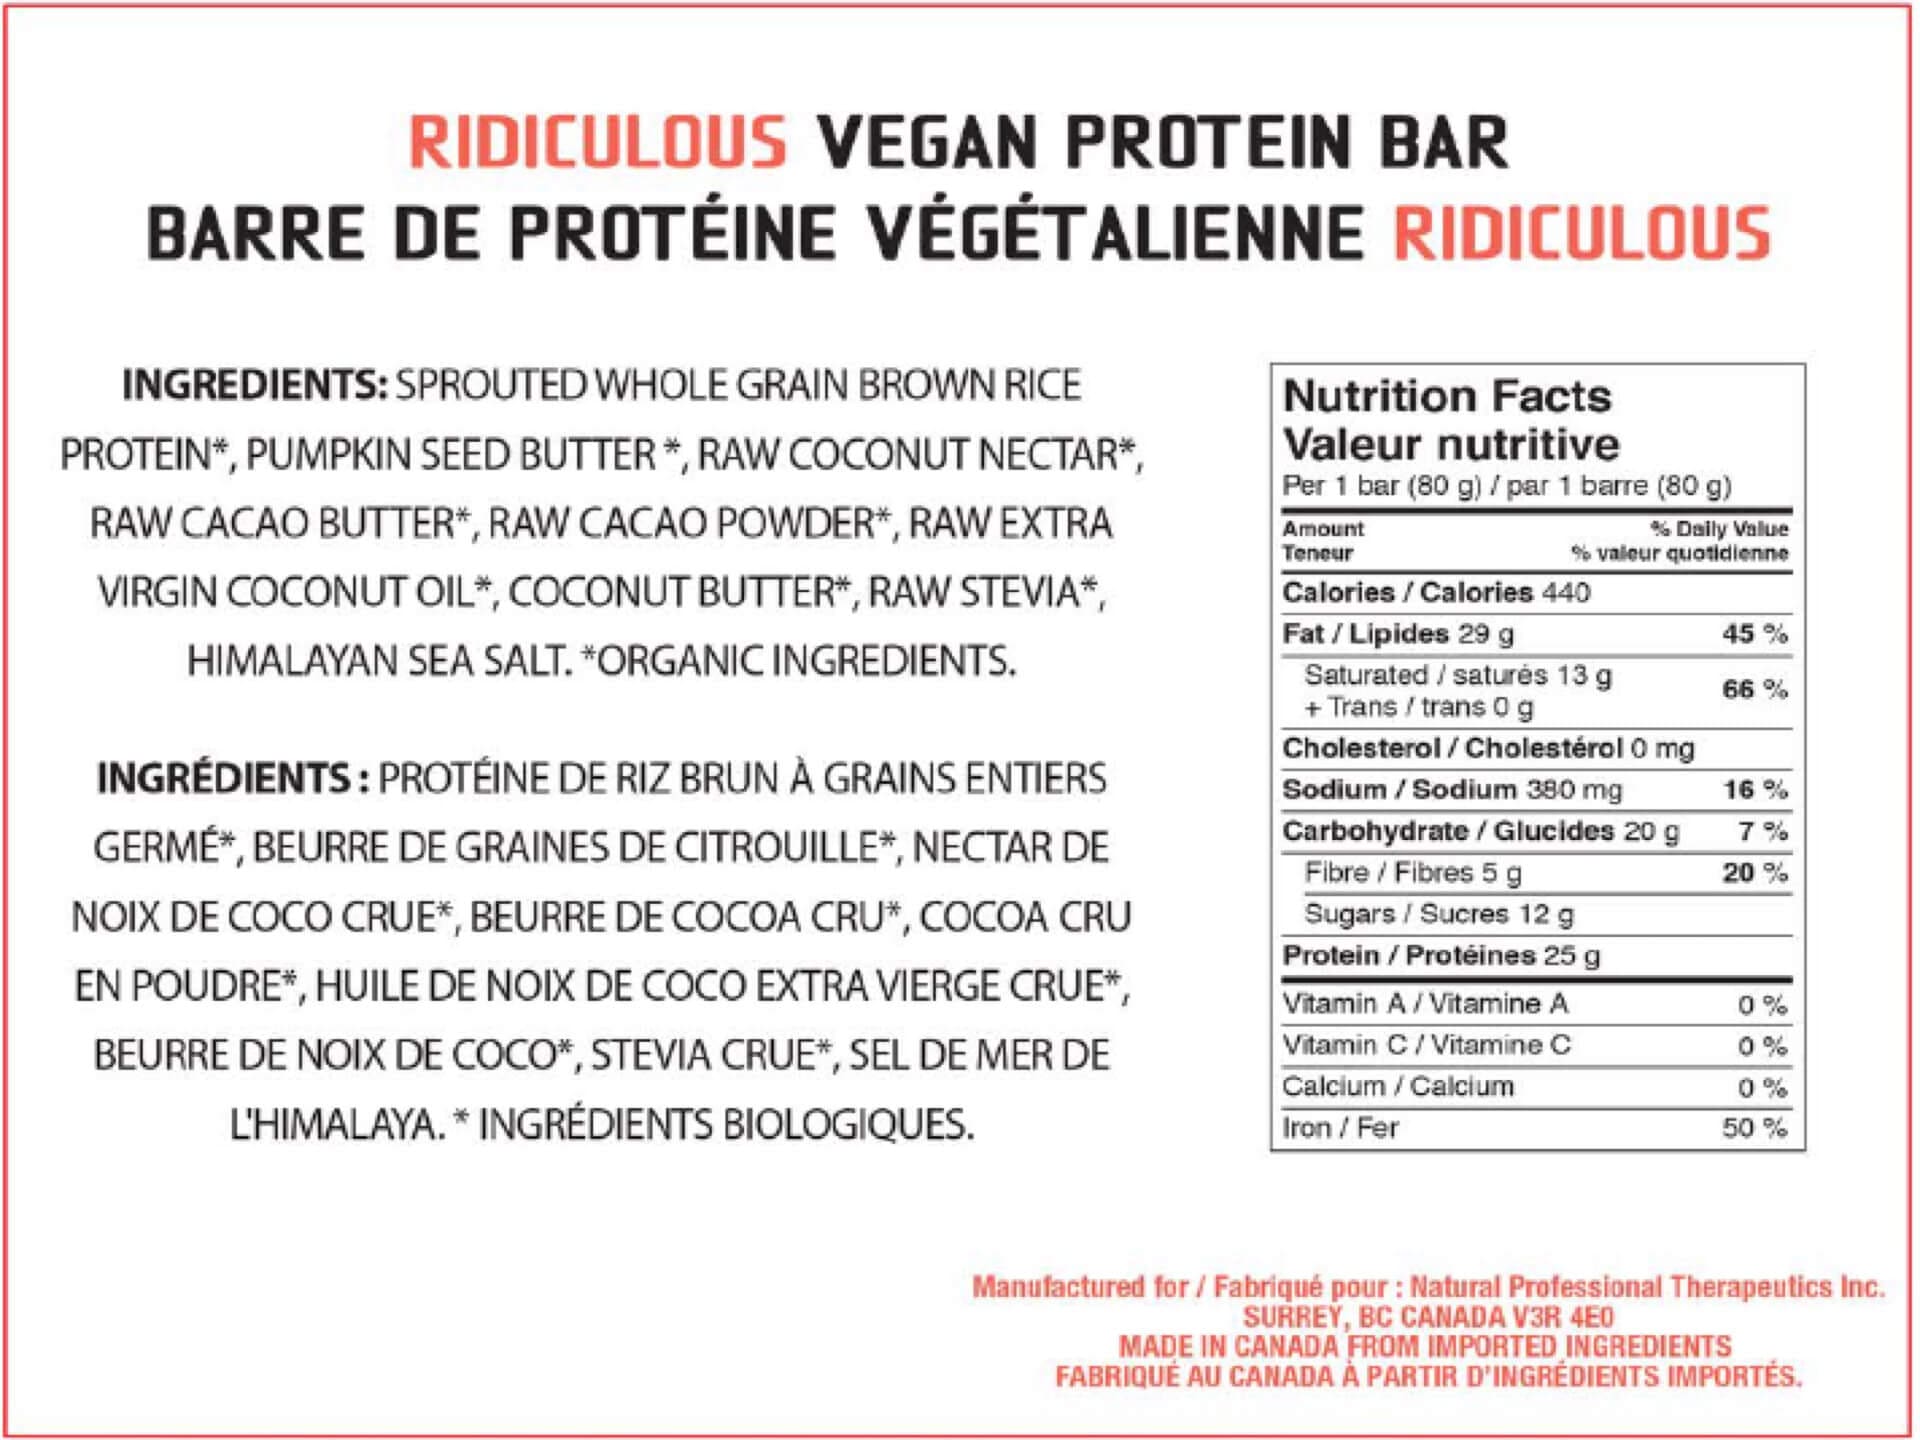 Ridiculous Protein Bar 80g each (BOX of 12) HIGH Protein LOW Carb Vegan Organic Superfood  * Gluten-Free  * Wheat-Free  * Soy-Free  * Egg-Free  * Dairy-Free  * Corn-Free  * Yeast-Free